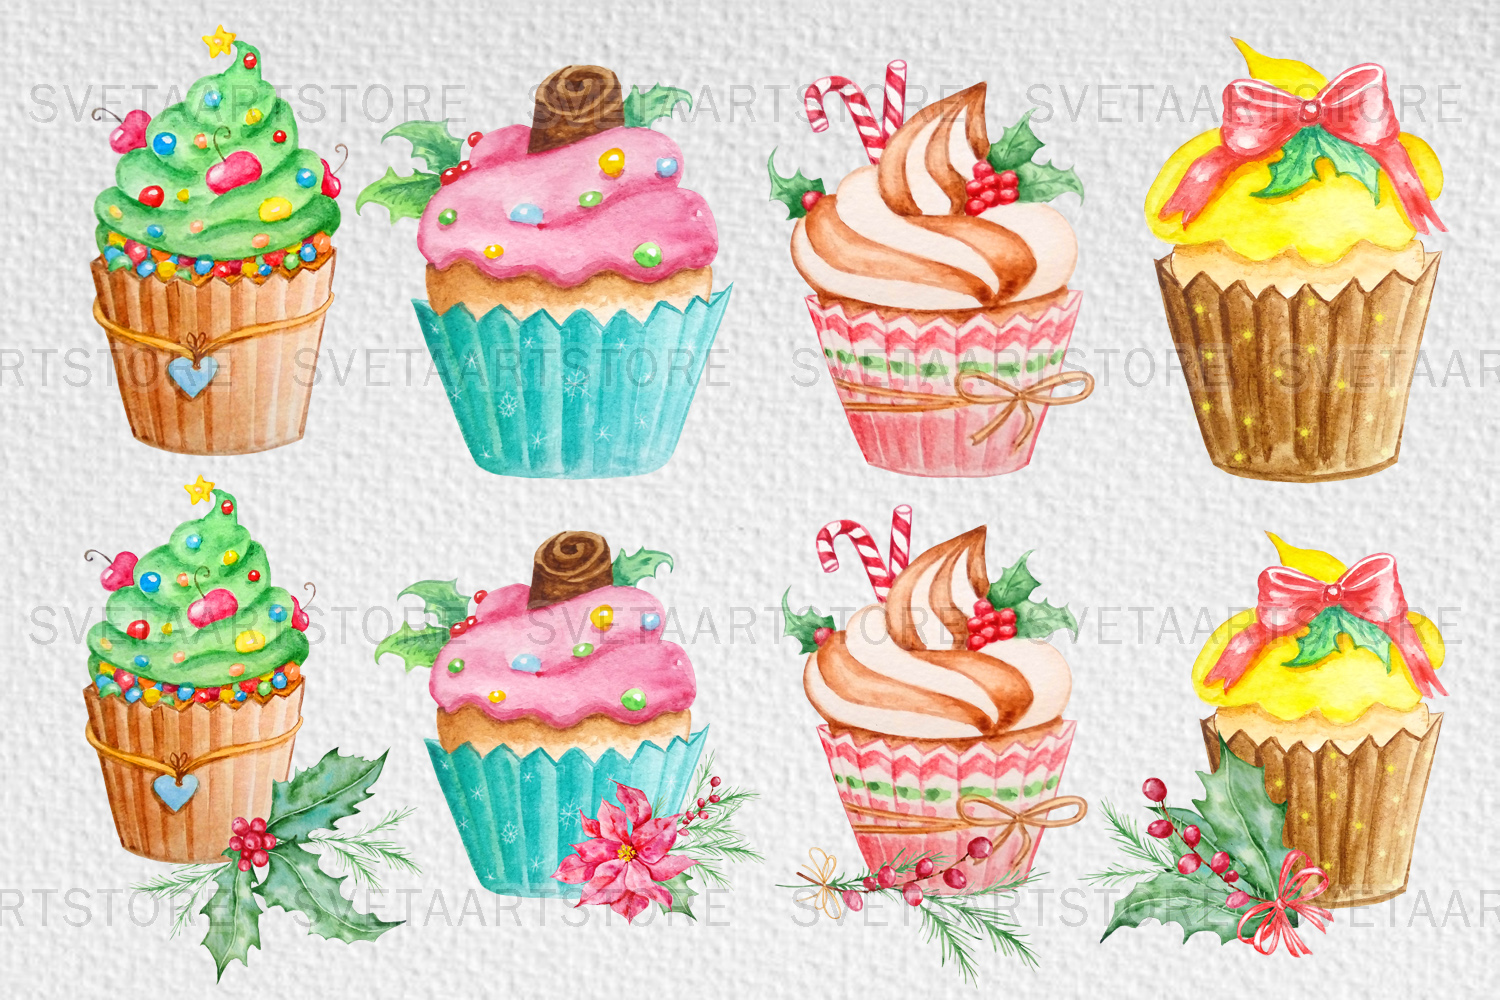 Christmas cupcakes clipart, watercolor cake.